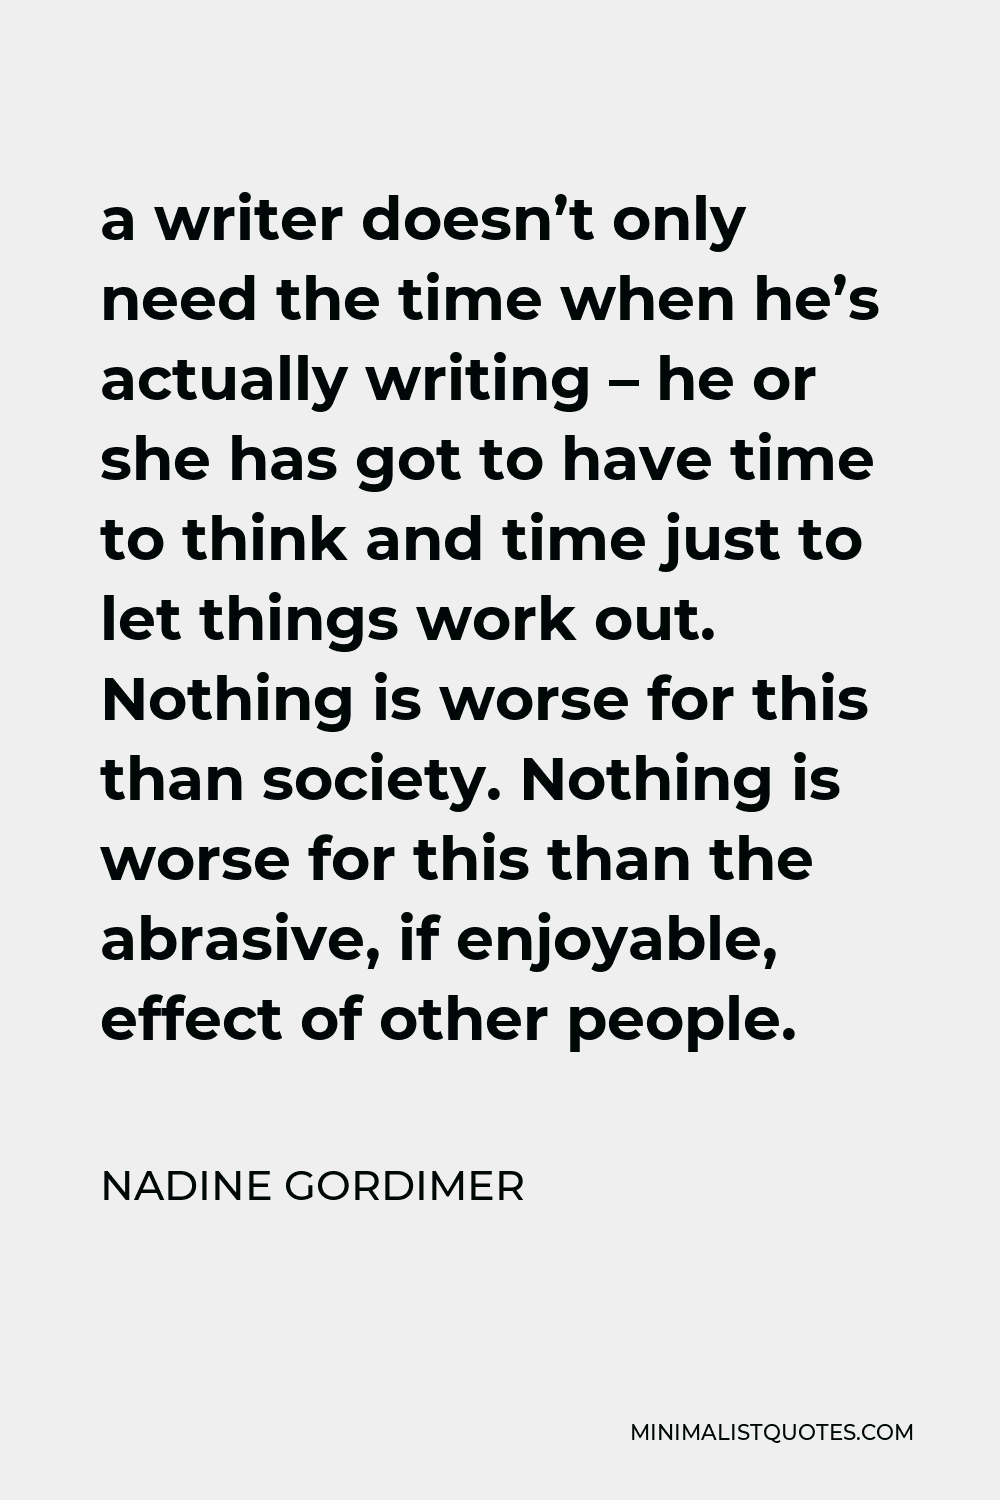 Nadine Gordimer Quote - a writer doesn’t only need the time when he’s actually writing – he or she has got to have time to think and time just to let things work out. Nothing is worse for this than society. Nothing is worse for this than the abrasive, if enjoyable, effect of other people.